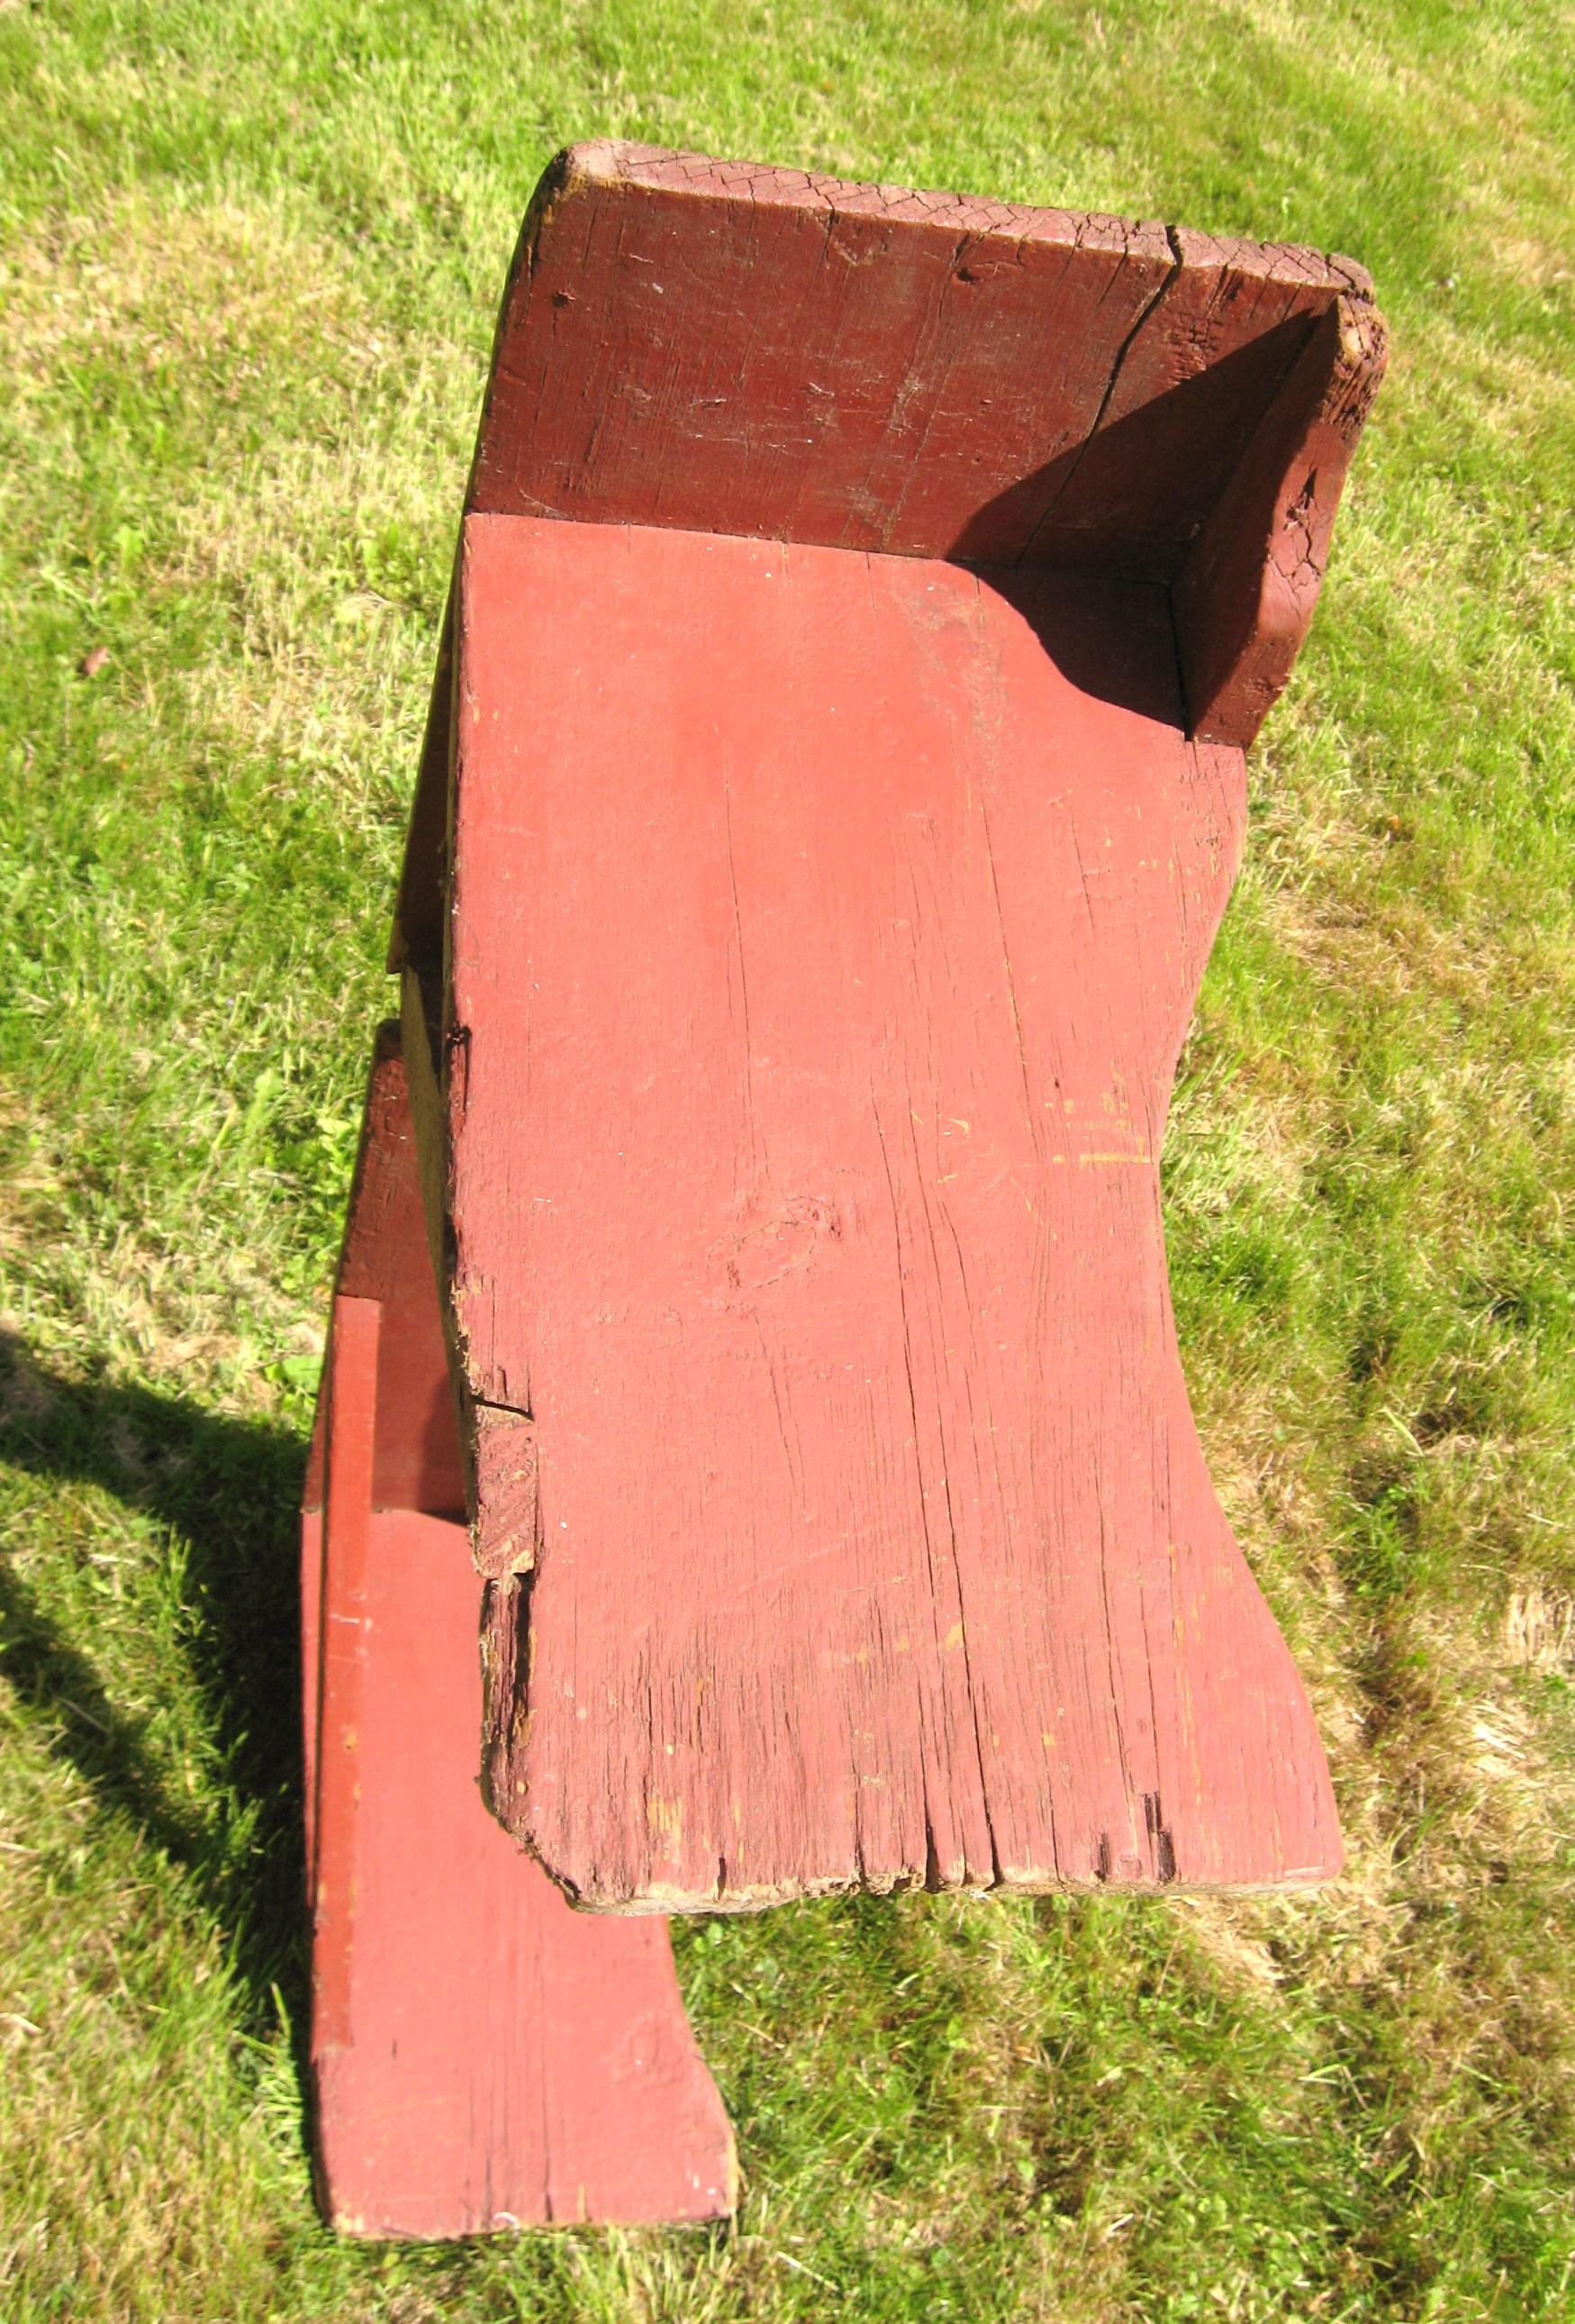 Wood 1920s Pine Bench in Great Original Barn Red Paint For Sale